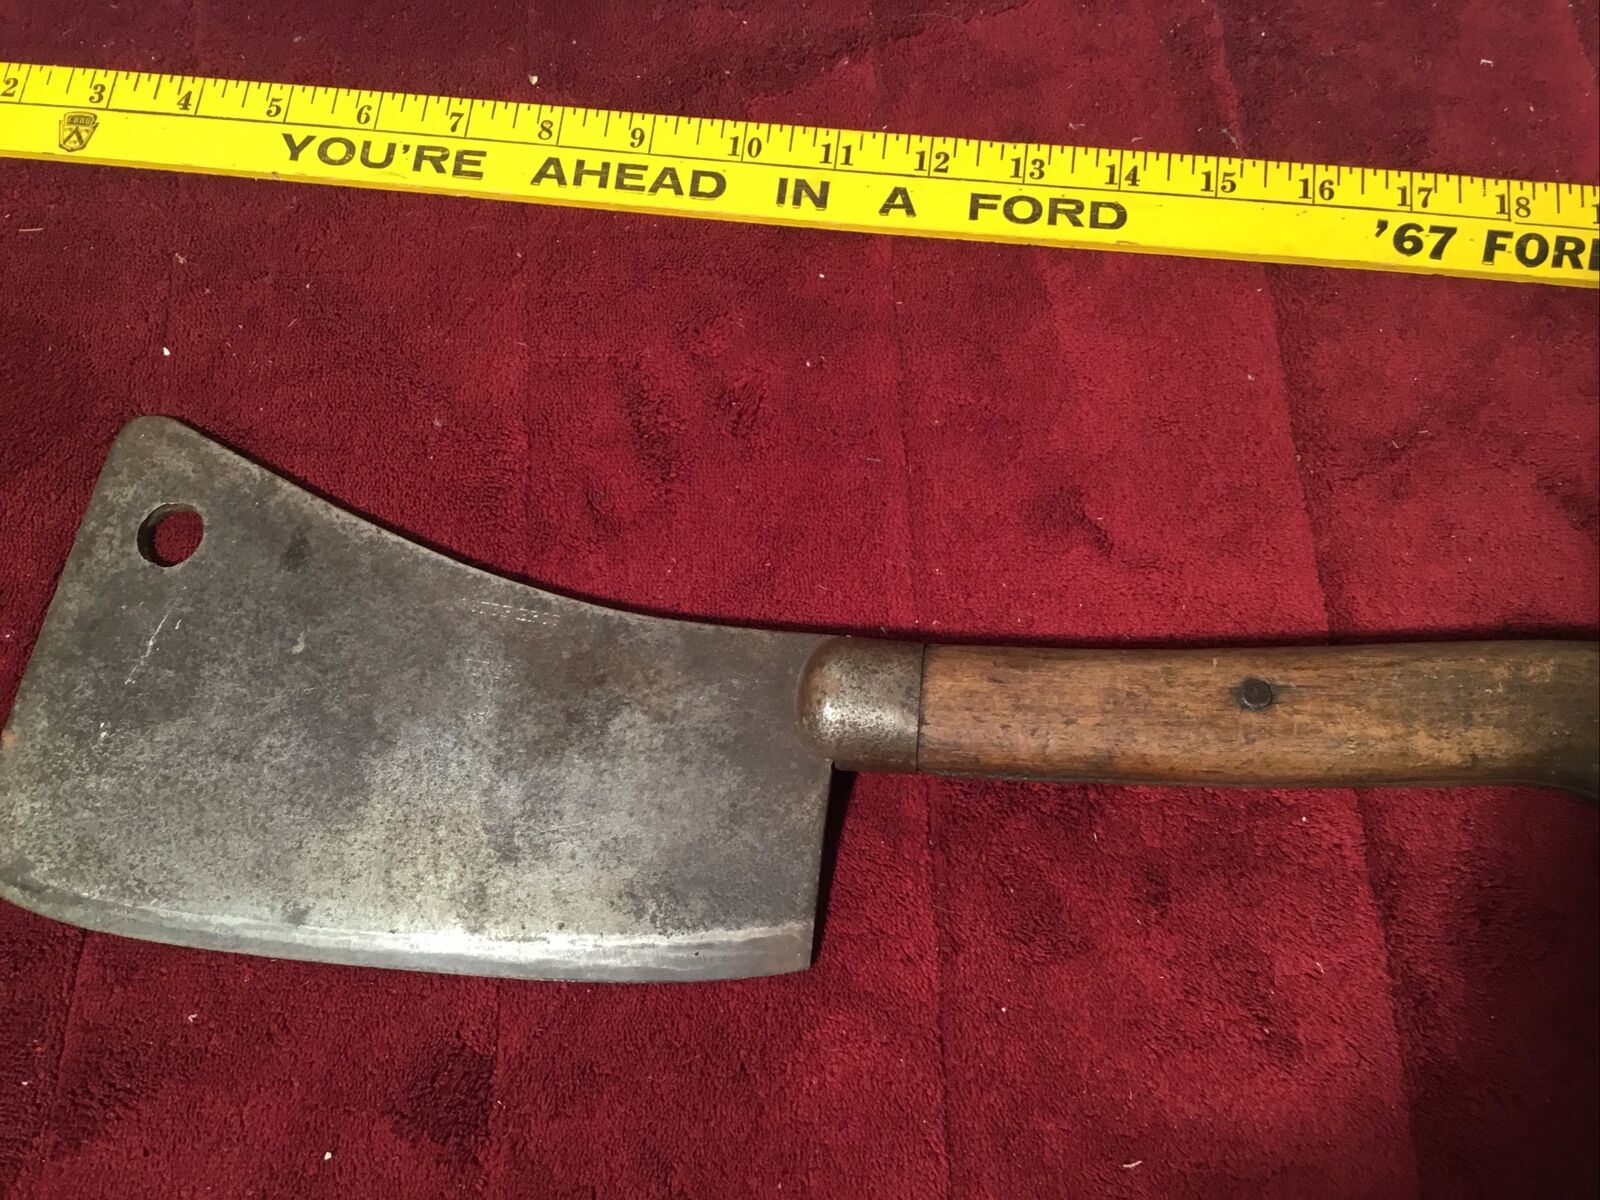 [RARE] ANTIQUE FOSTER BROS. #8 MEAT CLEAVER 16” GOOD CONDITION SOLID STEEL